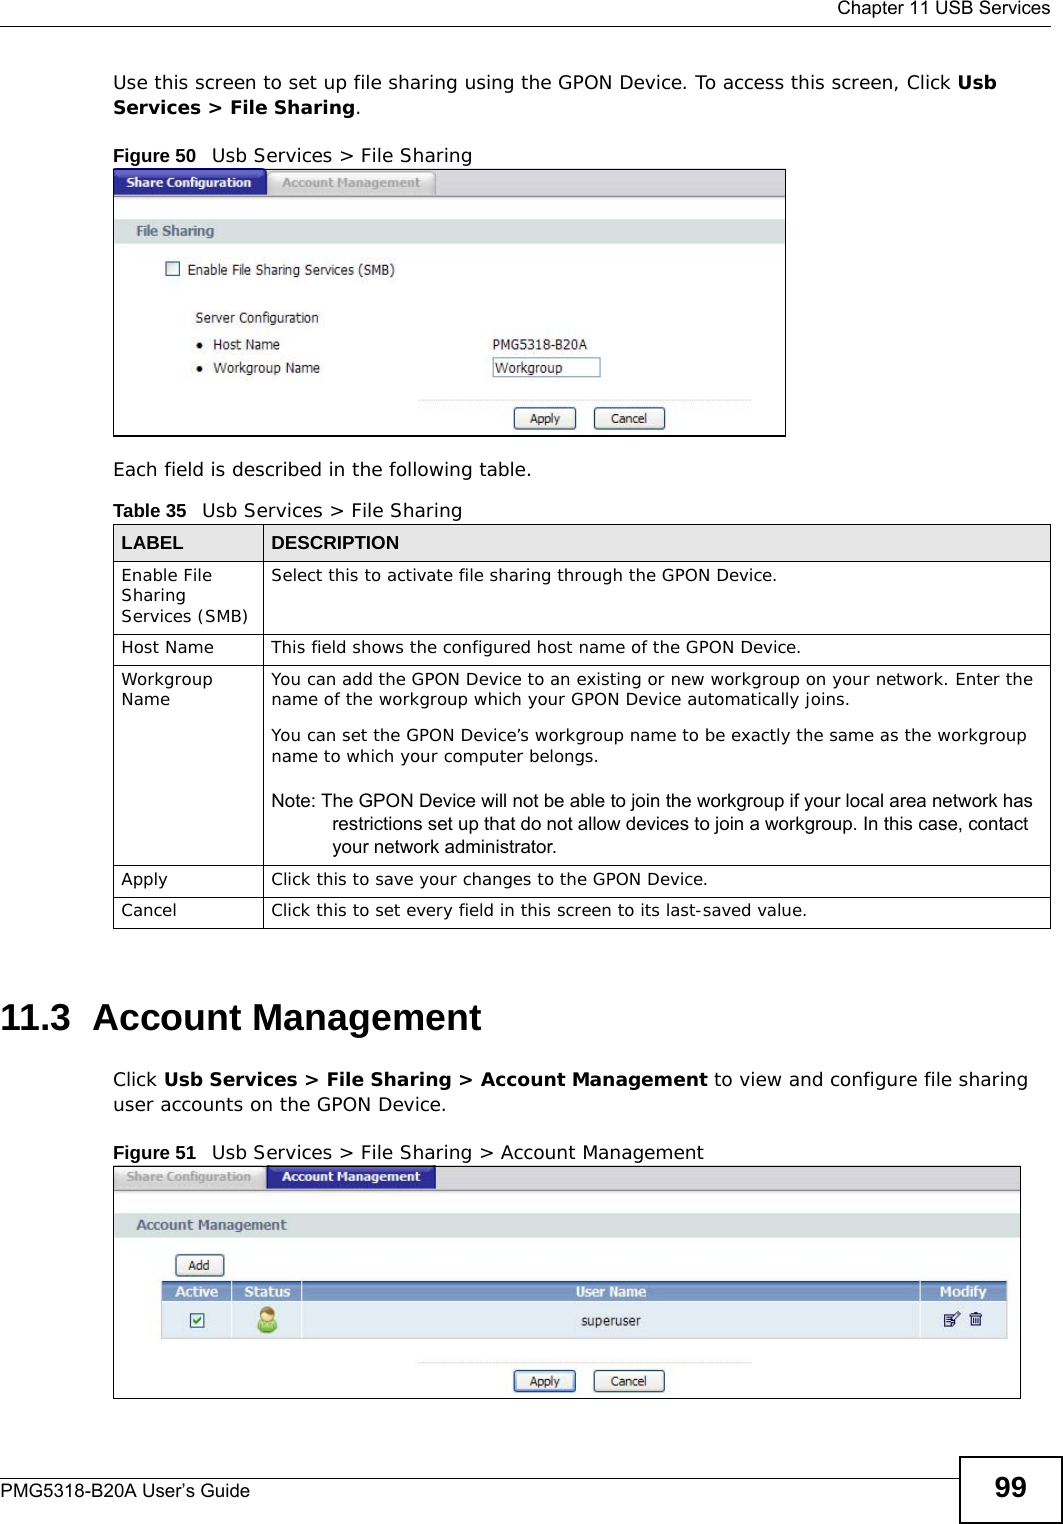  Chapter 11 USB ServicesPMG5318-B20A User’s Guide 99Use this screen to set up file sharing using the GPON Device. To access this screen, Click Usb Services &gt; File Sharing.Figure 50   Usb Services &gt; File SharingEach field is described in the following table.11.3  Account ManagementClick Usb Services &gt; File Sharing &gt; Account Management to view and configure file sharing user accounts on the GPON Device. Figure 51   Usb Services &gt; File Sharing &gt; Account ManagementTable 35   Usb Services &gt; File SharingLABEL DESCRIPTIONEnable File Sharing Services (SMB)Select this to activate file sharing through the GPON Device. Host Name This field shows the configured host name of the GPON Device.Workgroup Name You can add the GPON Device to an existing or new workgroup on your network. Enter the name of the workgroup which your GPON Device automatically joins.You can set the GPON Device’s workgroup name to be exactly the same as the workgroup name to which your computer belongs.Note: The GPON Device will not be able to join the workgroup if your local area network has restrictions set up that do not allow devices to join a workgroup. In this case, contact your network administrator.Apply Click this to save your changes to the GPON Device.Cancel Click this to set every field in this screen to its last-saved value.